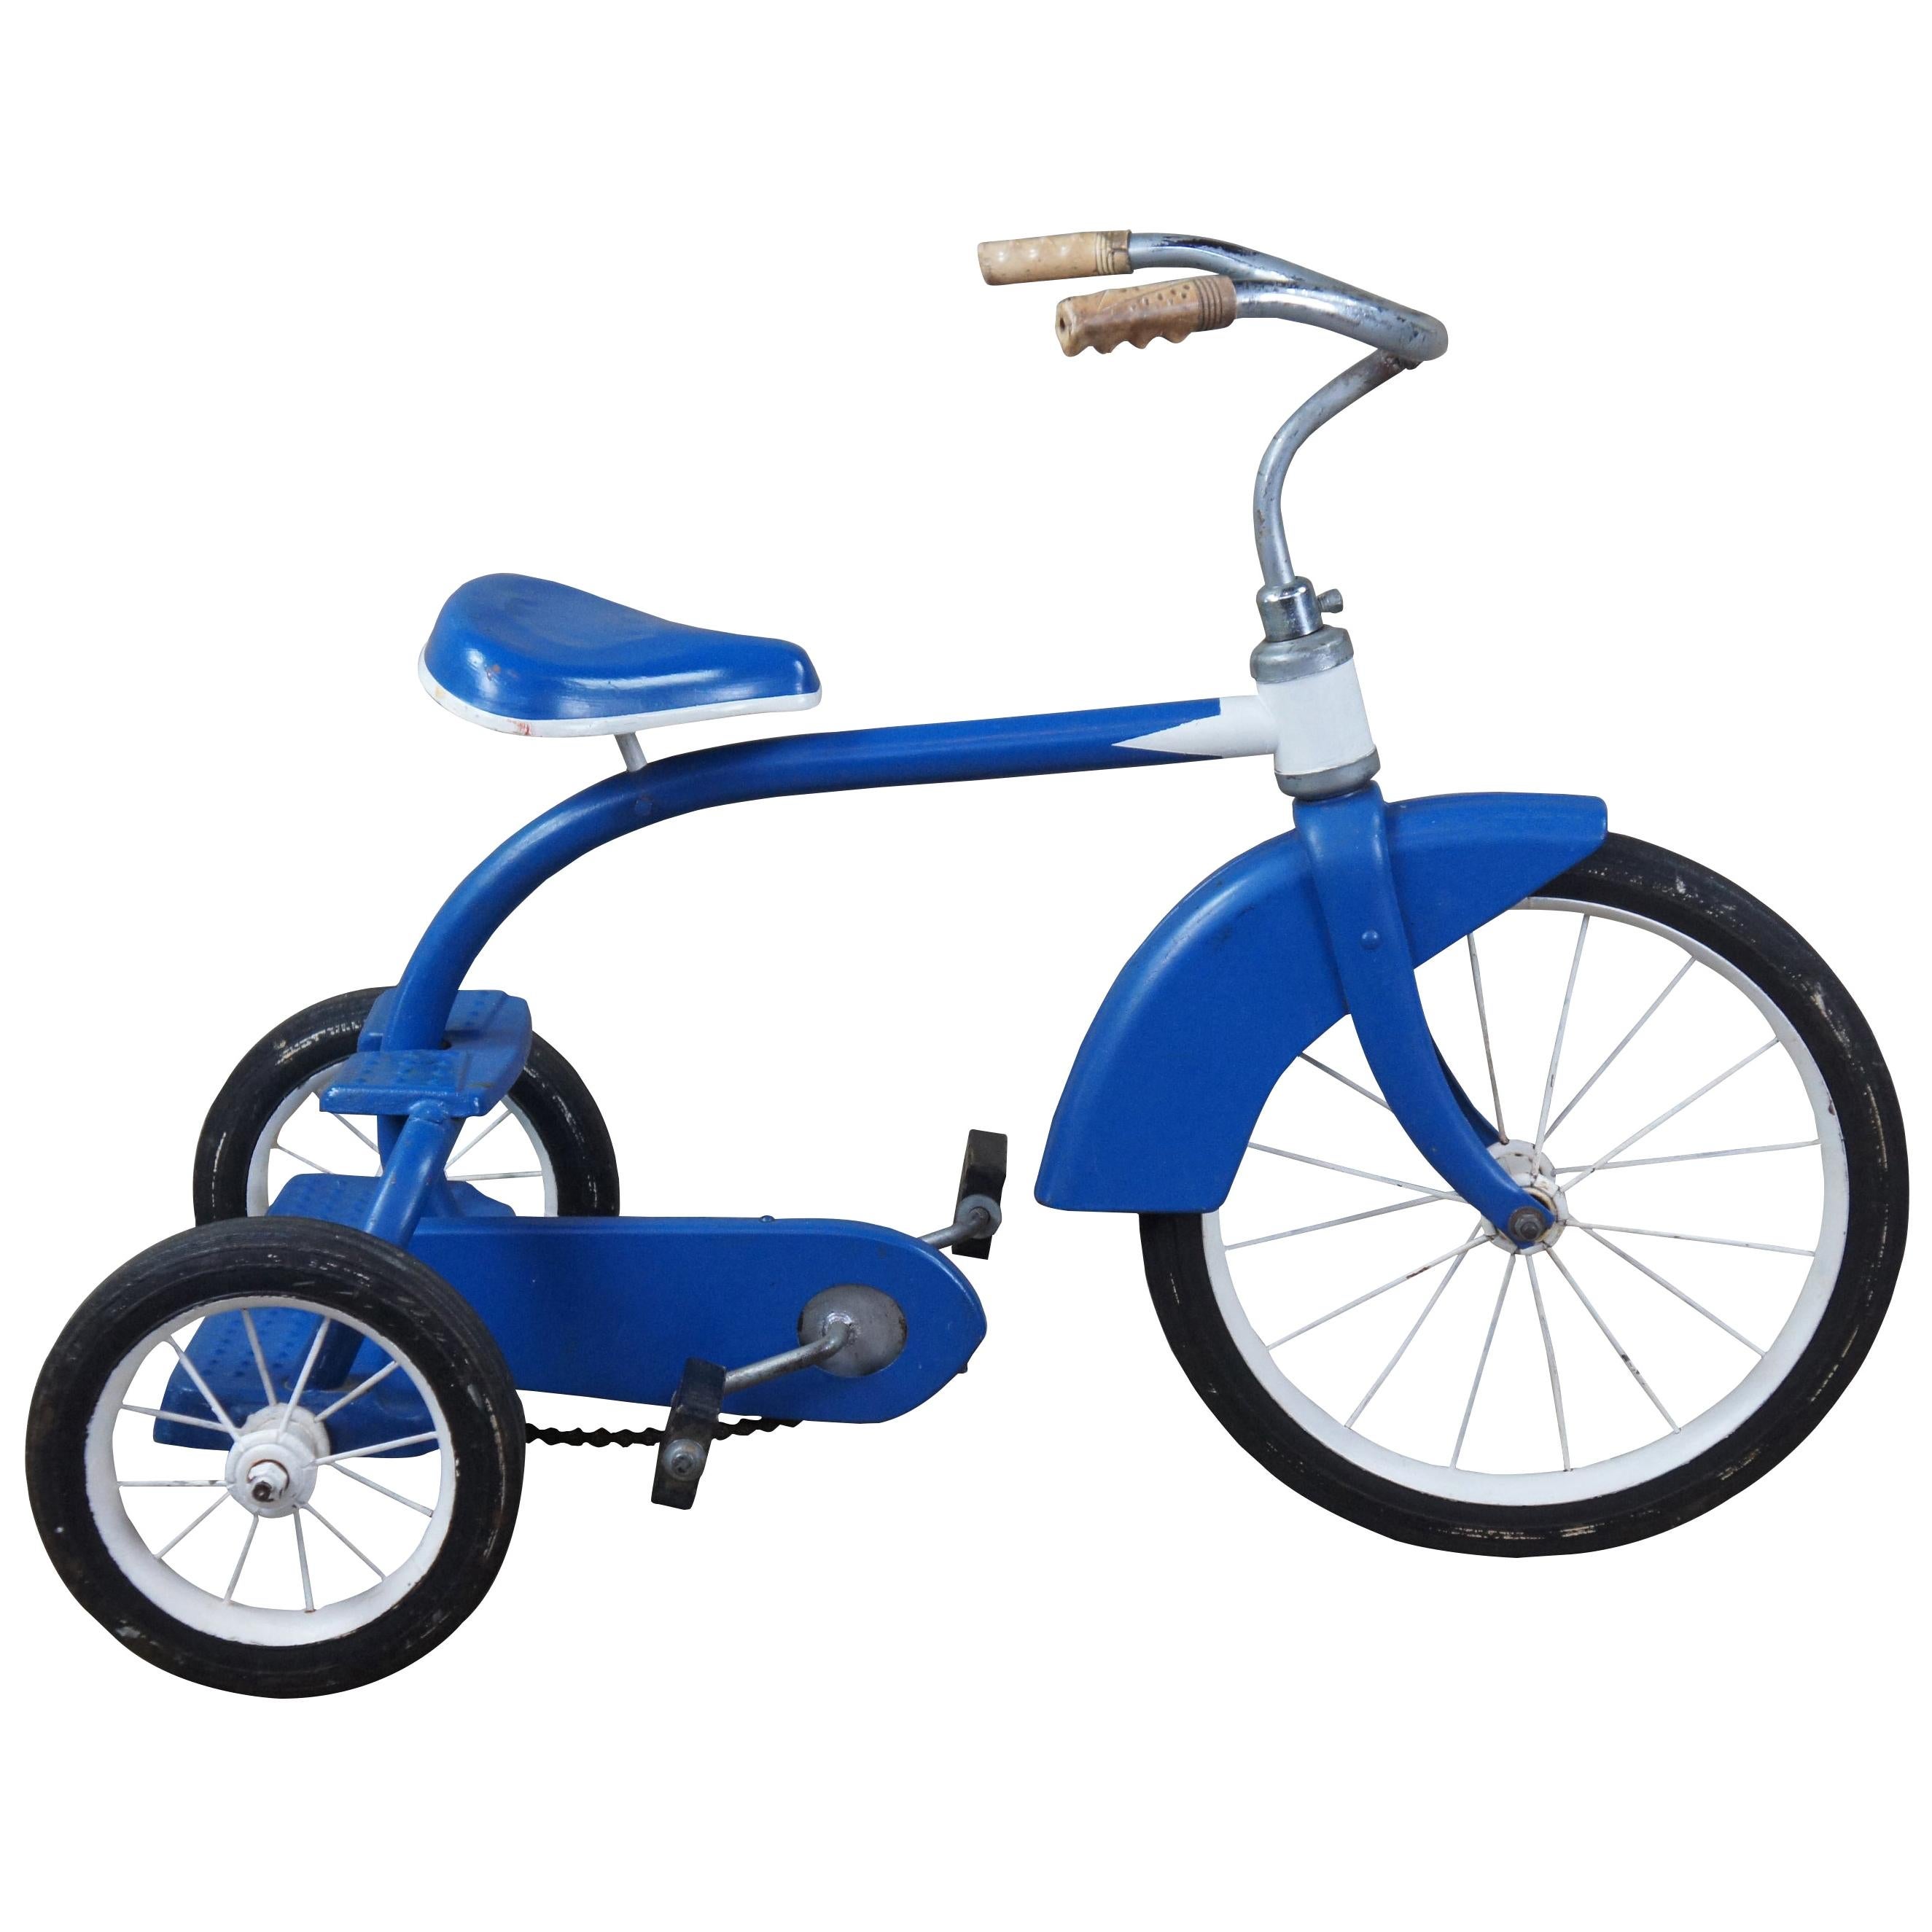 1960s Vintage Western Flyer Blue & White Childs Tricycle Pedal Bike Atomic